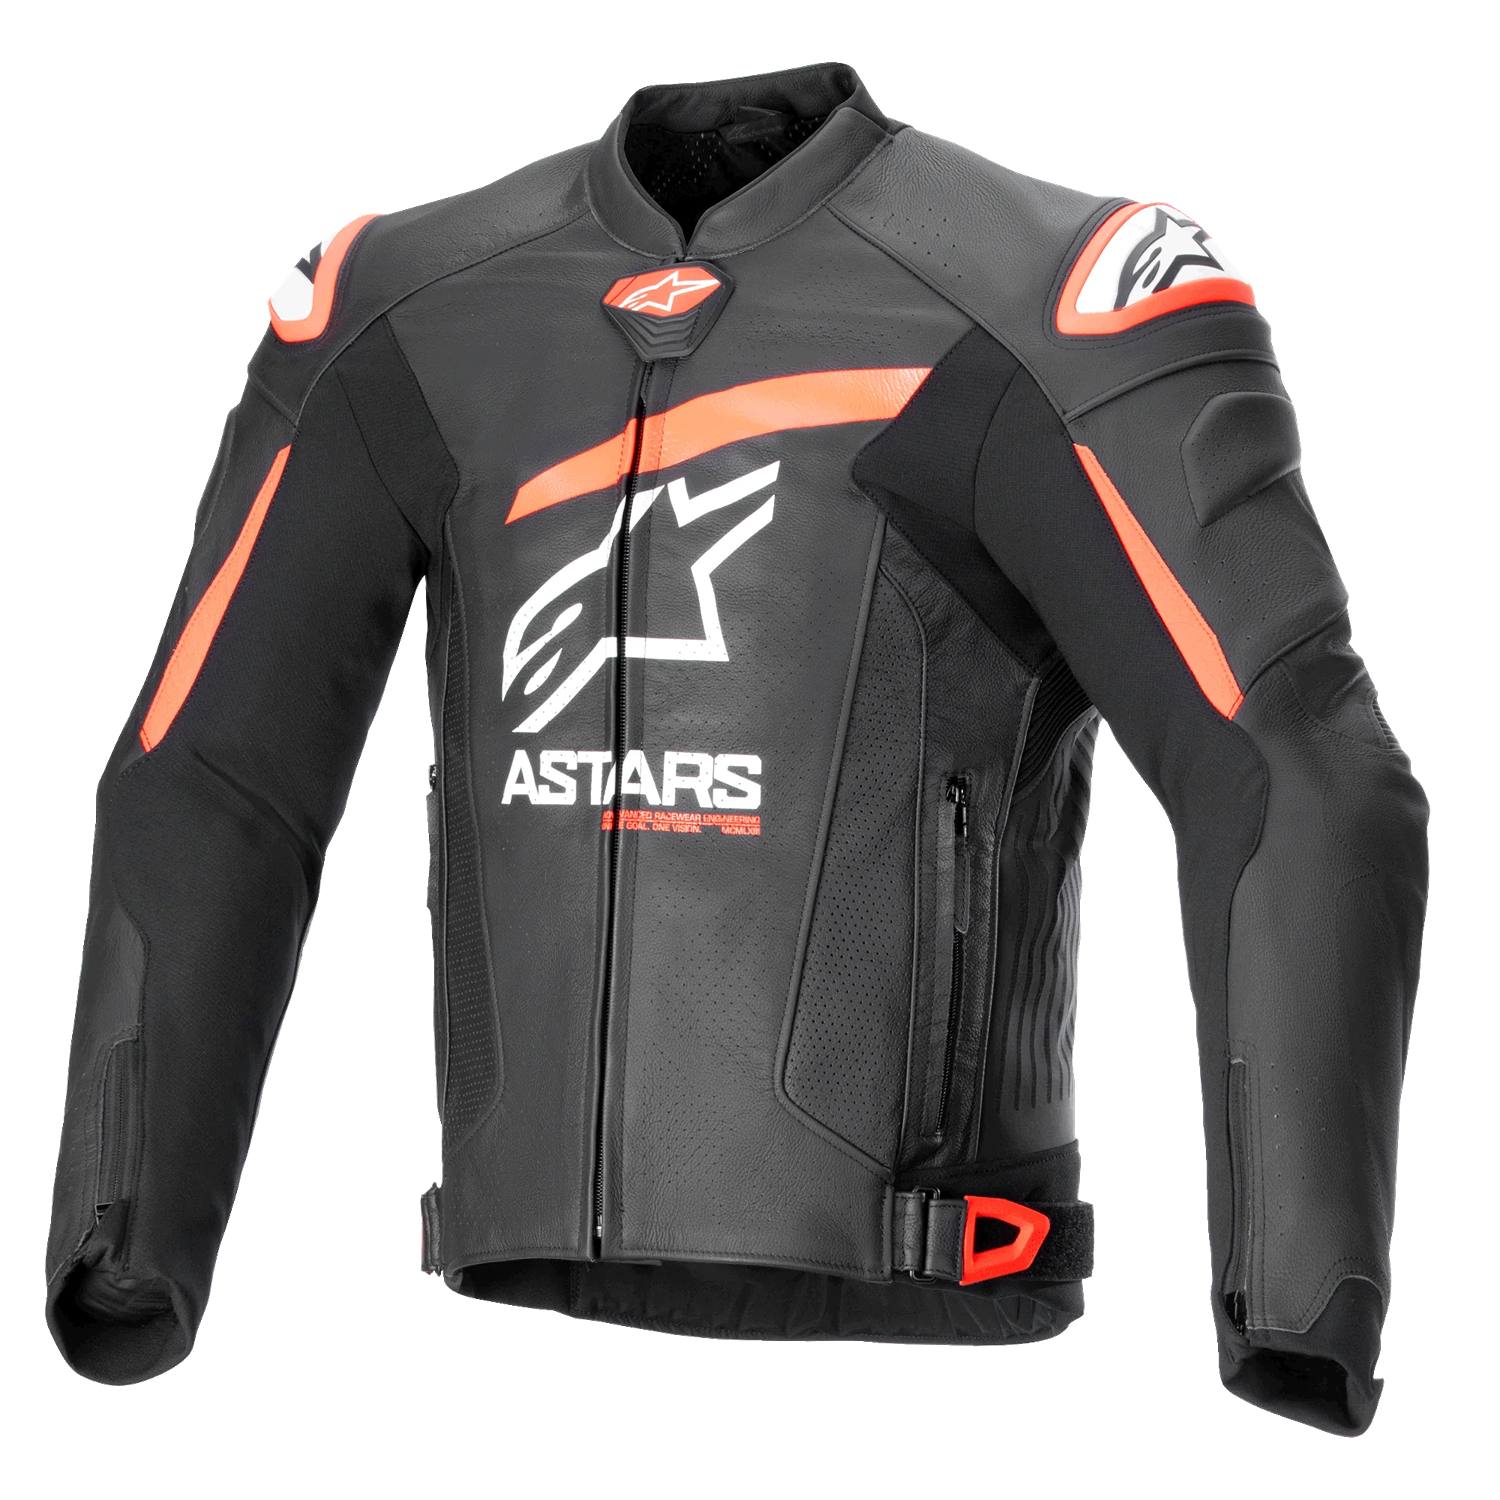 Image of Alpinestars Gp Plus R V4 Airflow Leather Jacket Black Red Fluo White Size 54 ID 8059347341750